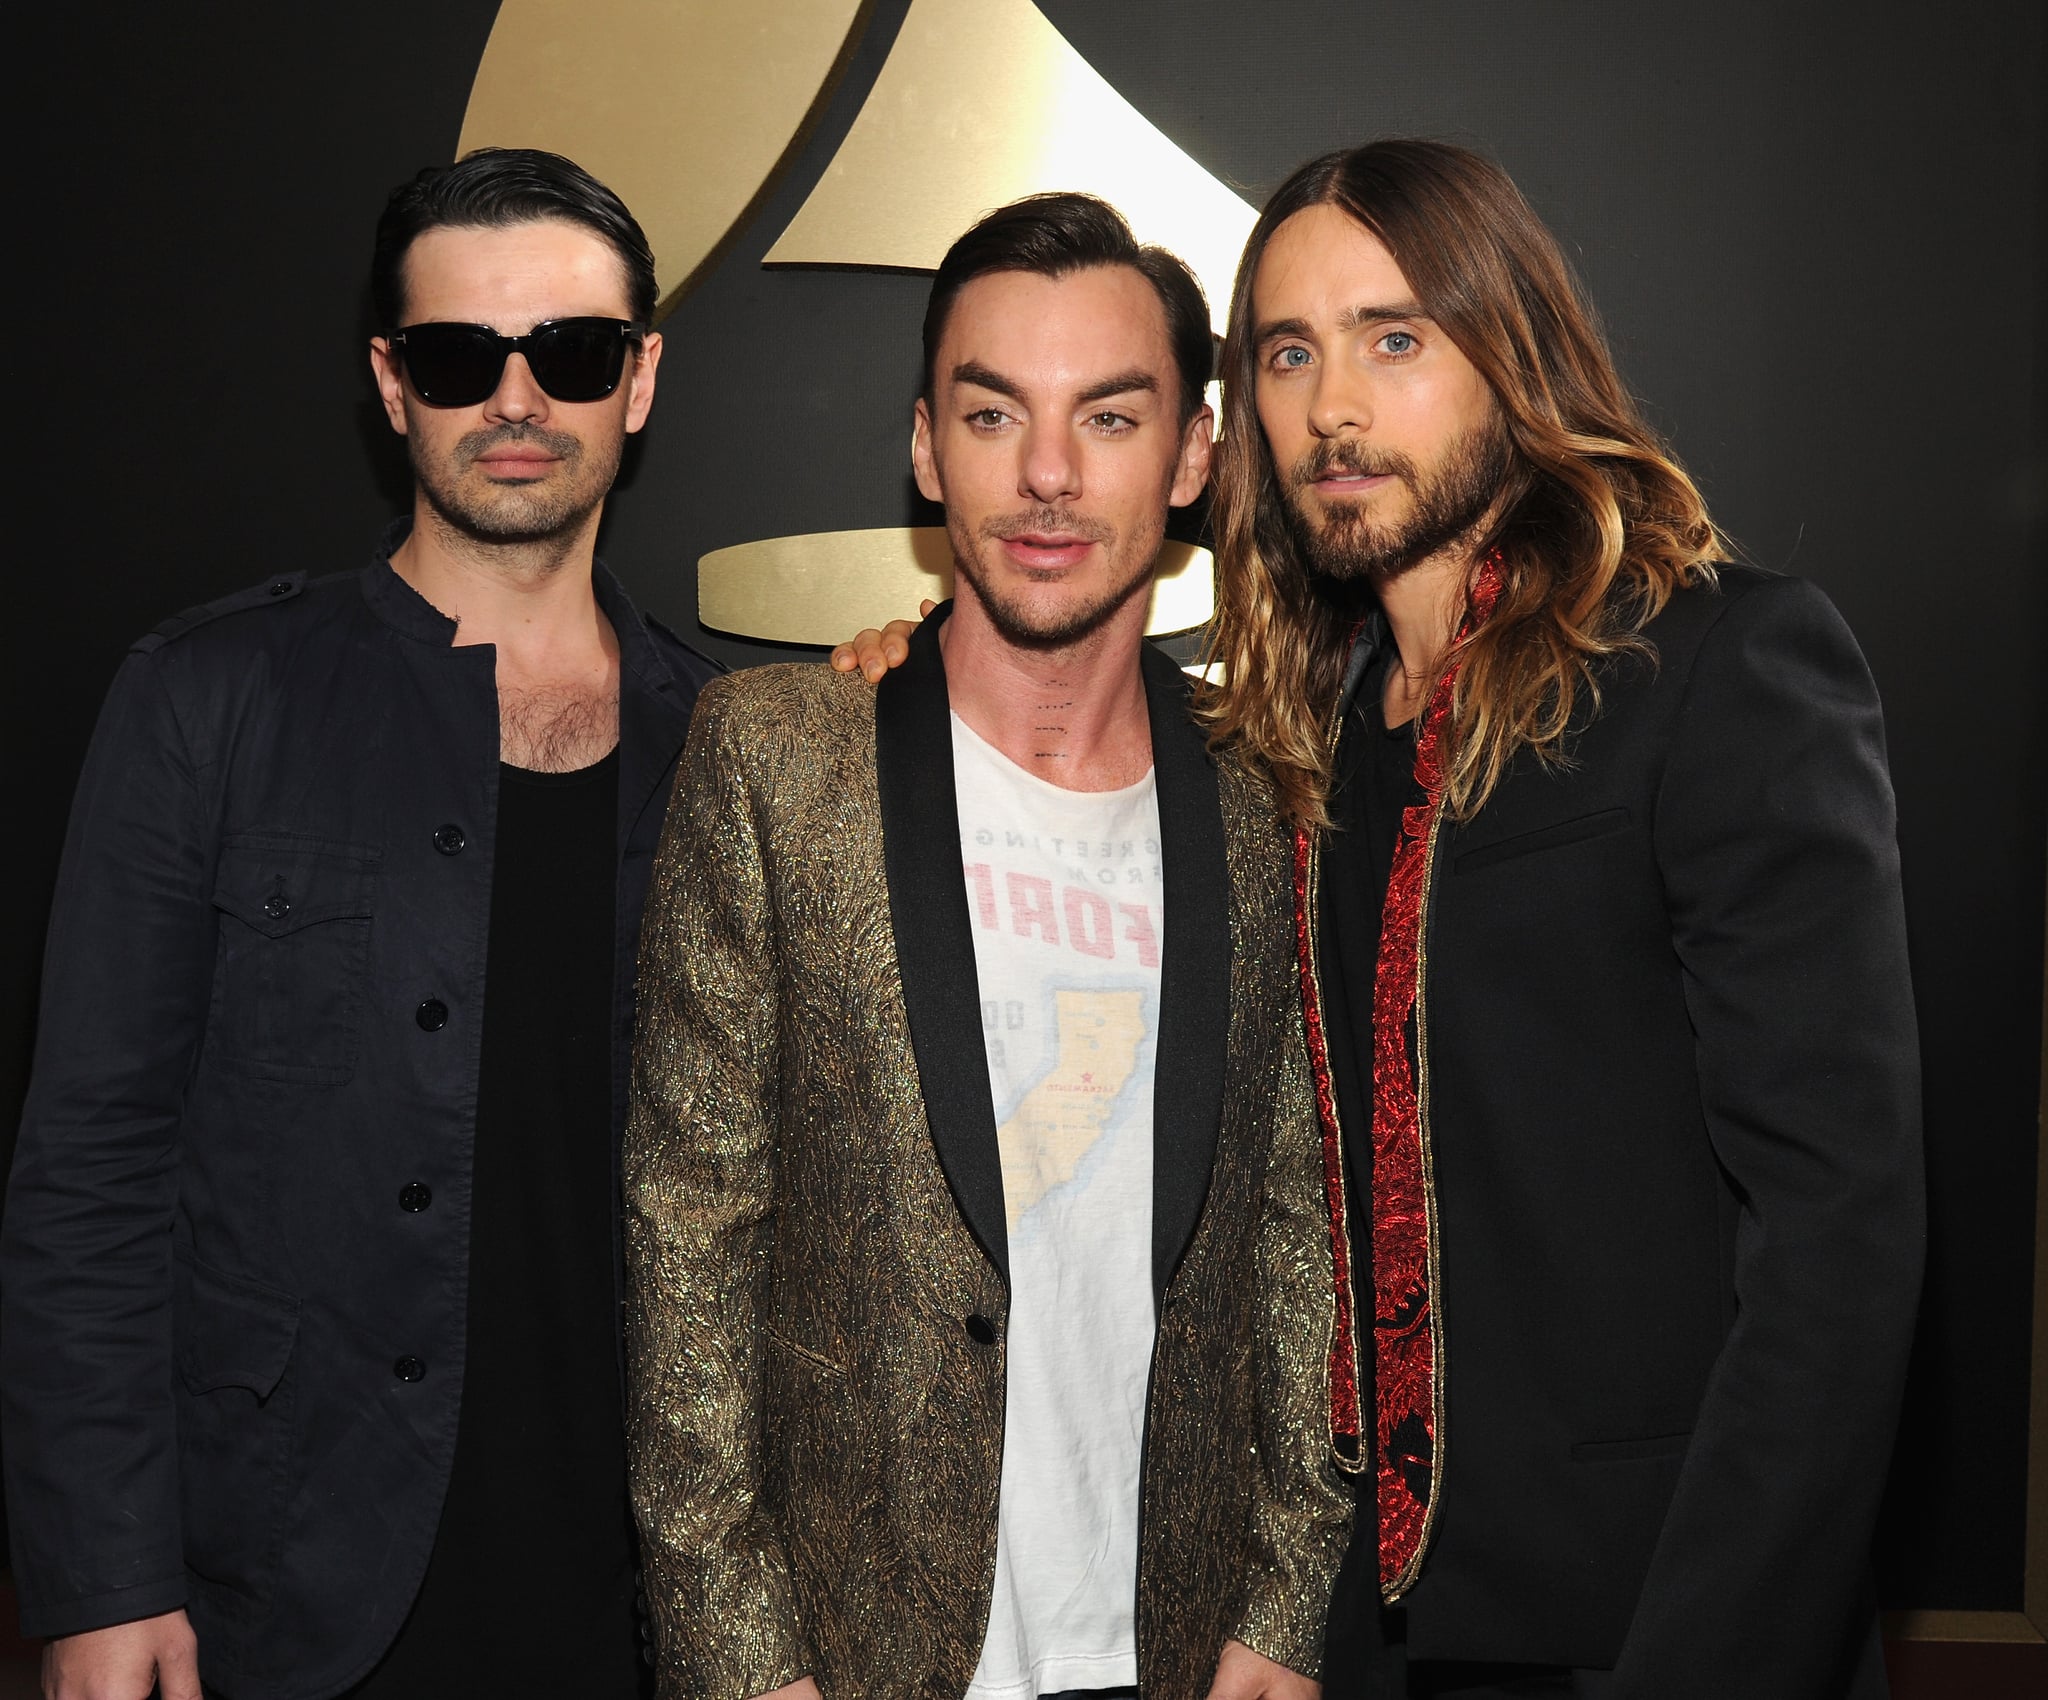 Seasons seconds to mars. 30 Seconds to Mars. Группа Thirty seconds to Mars. Tomo Milicevic and Shannon Leto. Джаред лето группа.